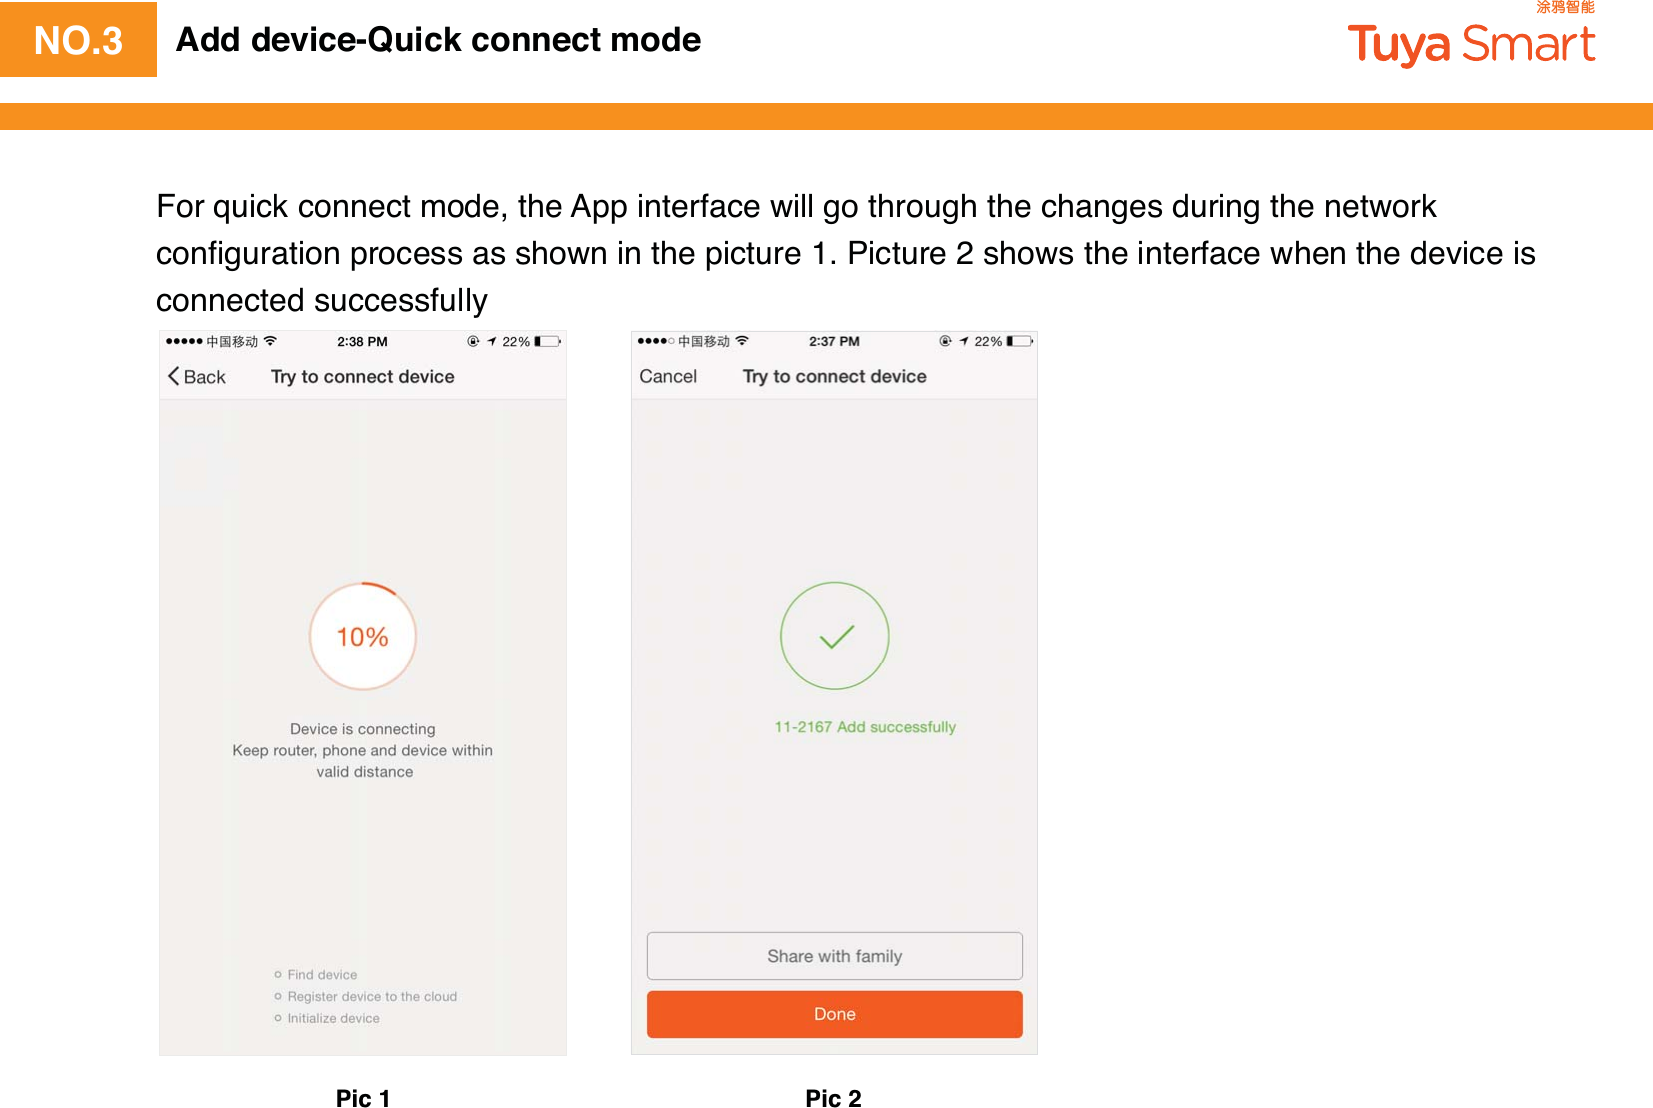 NO.3 Add device-Quick connect modeFor quick connect mode, the App interface will go through the changes during the network conﬁguration process as shown in the picture 1. Picture 2 shows the interface when the device is connected successfullyPic 1 Pic 2